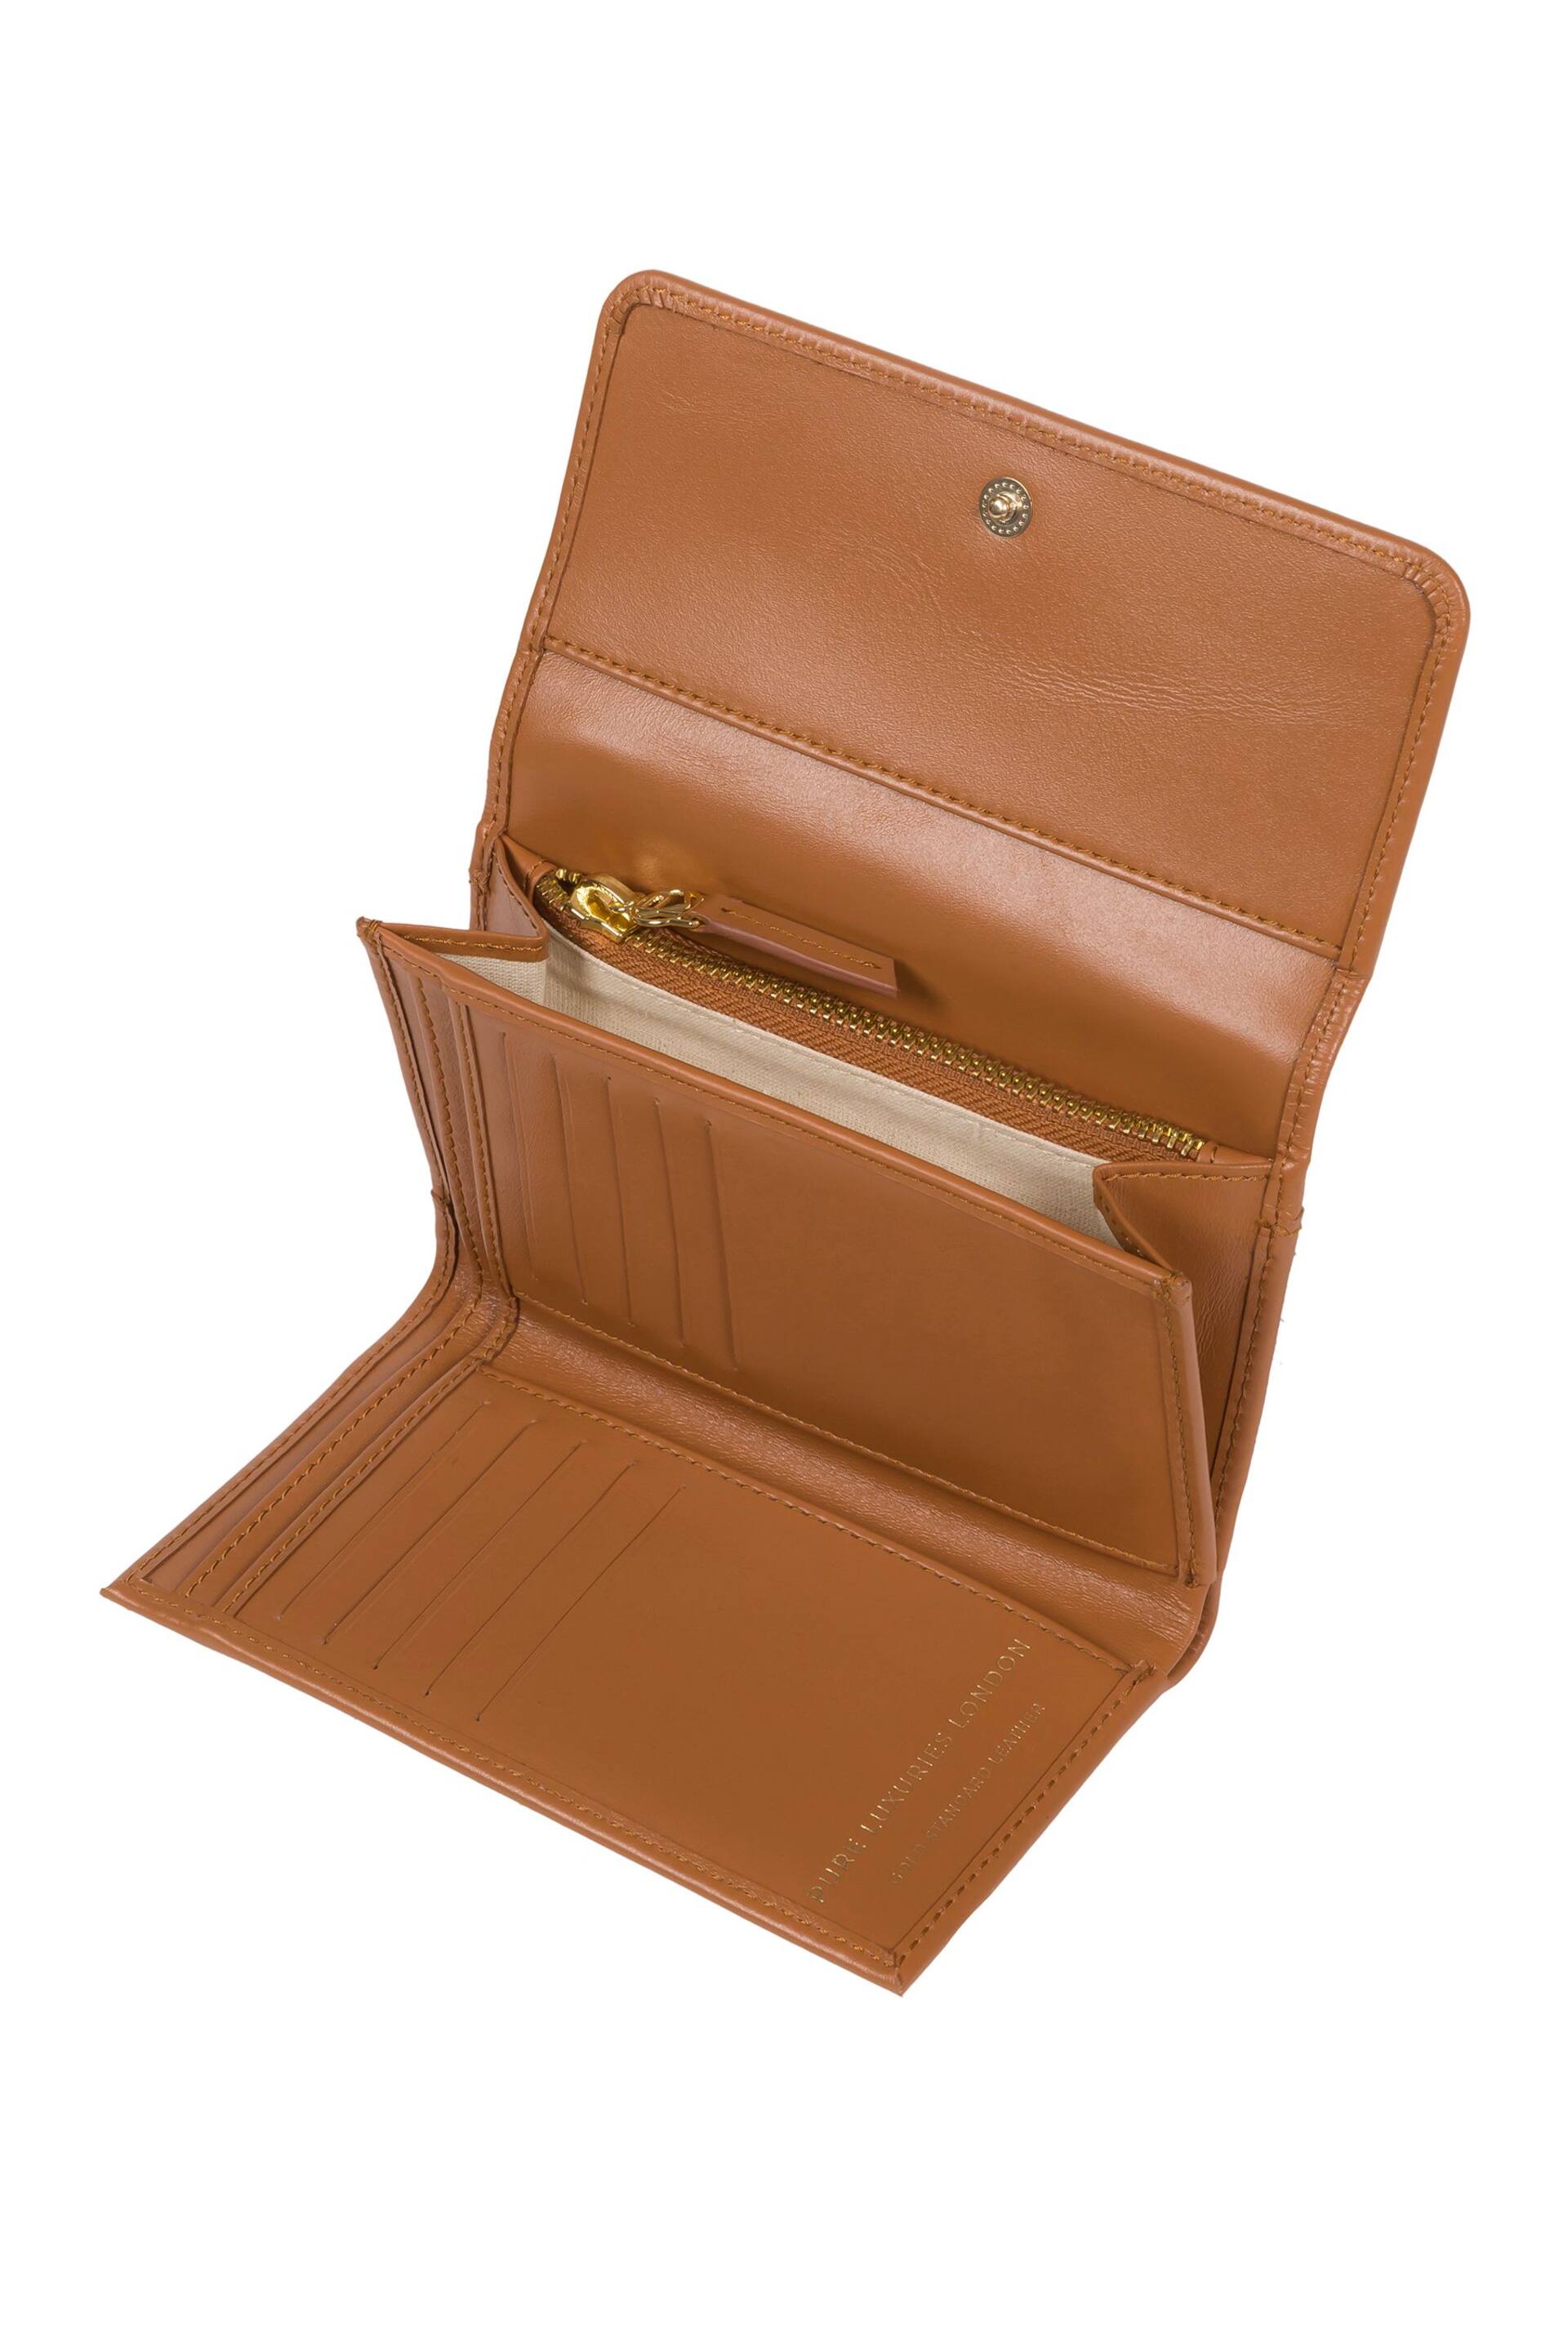 Pure Luxuries London Metz Leather Tri-Fold Purse - Image 4 of 6